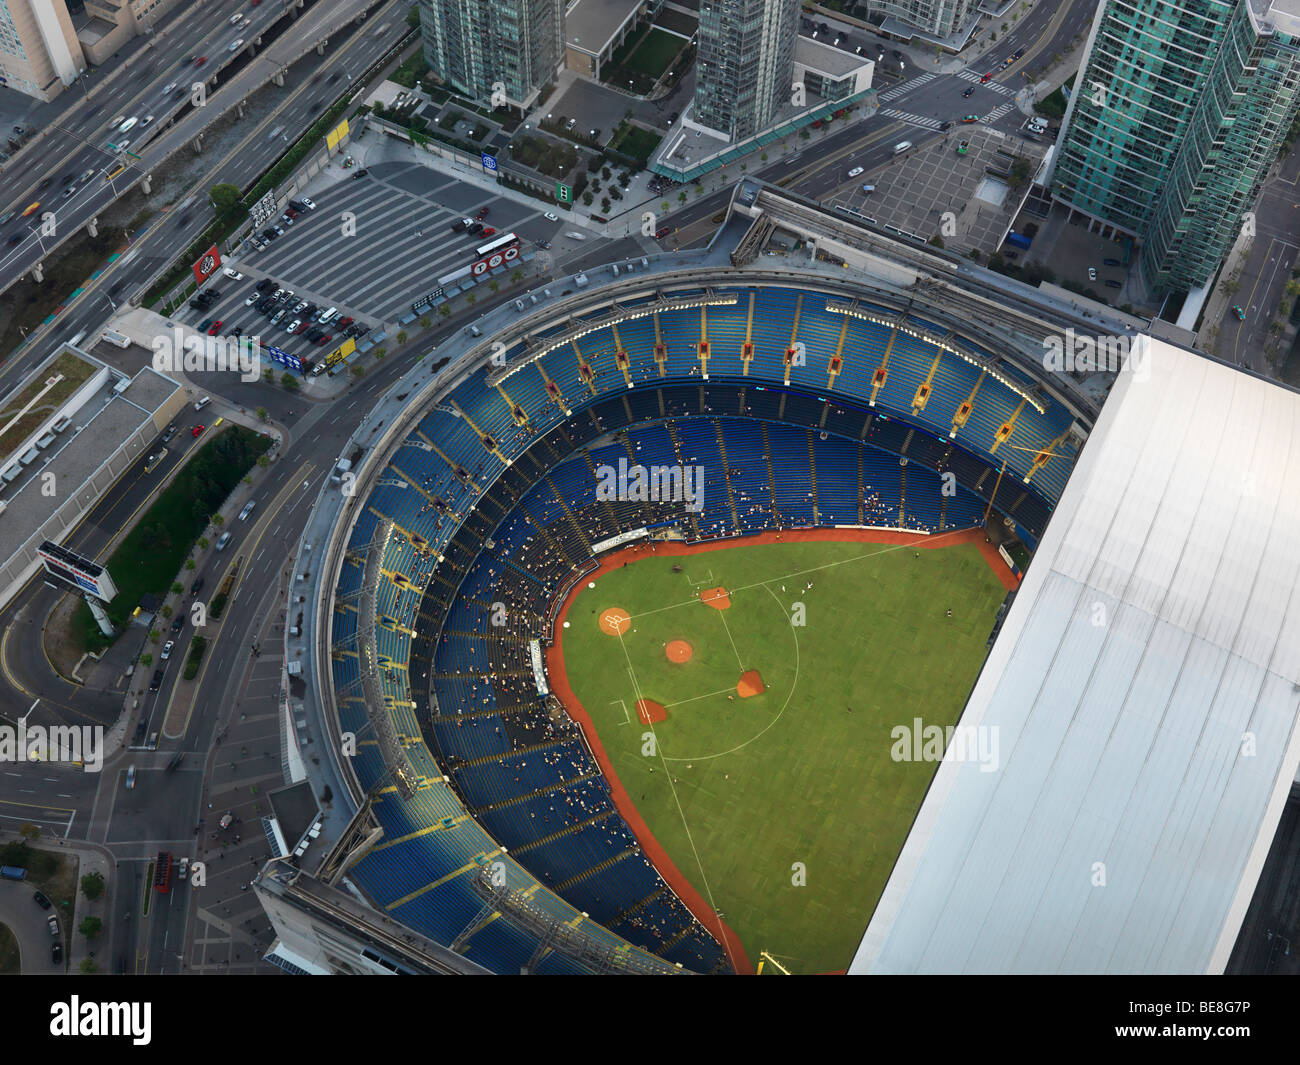 Baseball at the Rogers Centre in Downtown Toronto Editorial Photo - Image  of major, enthusiasts: 81957816